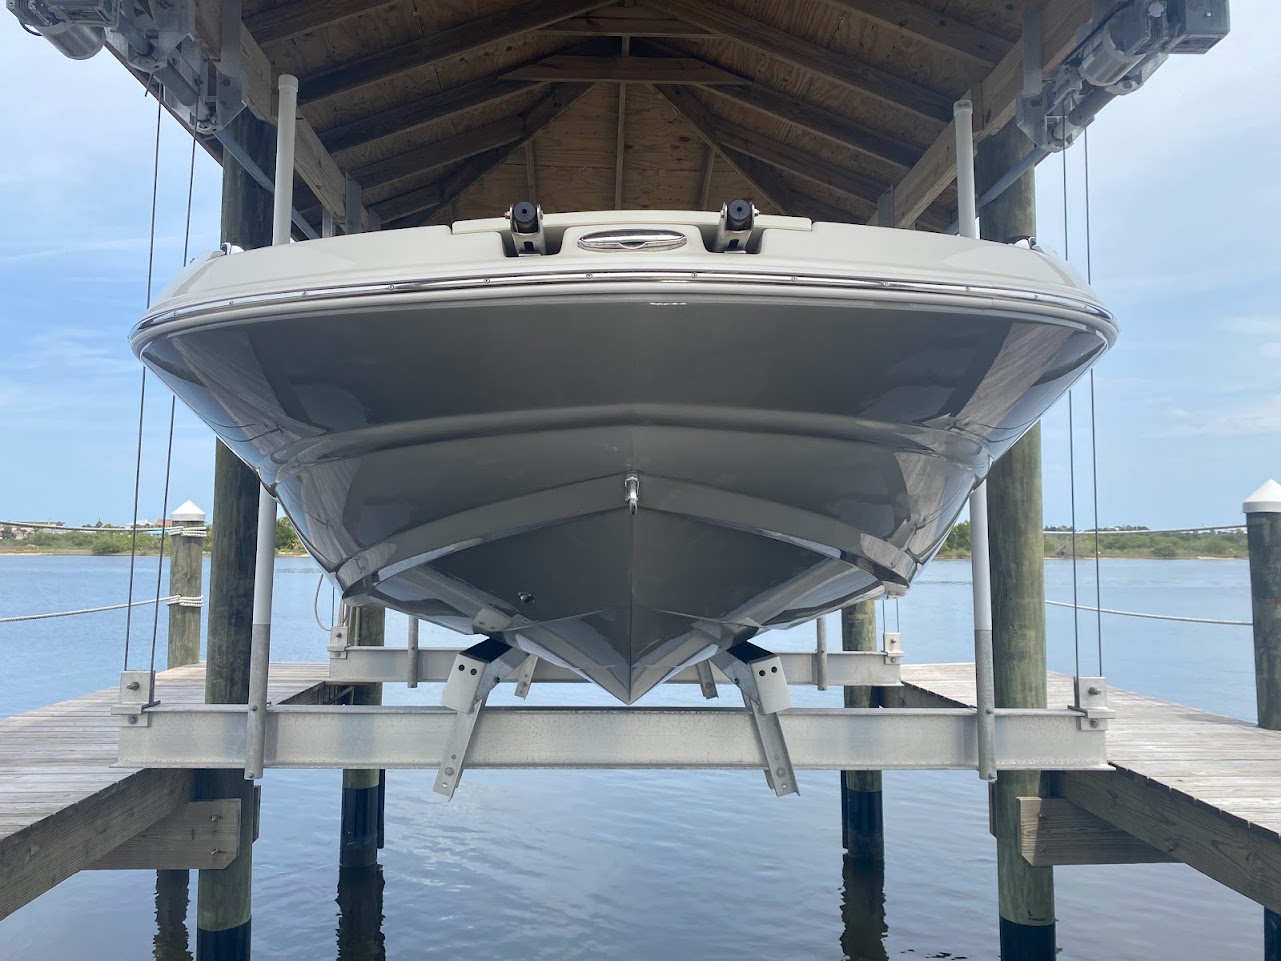 2022 Stingray 201DC Power boat for sale in Palm Coast, FL - image 3 